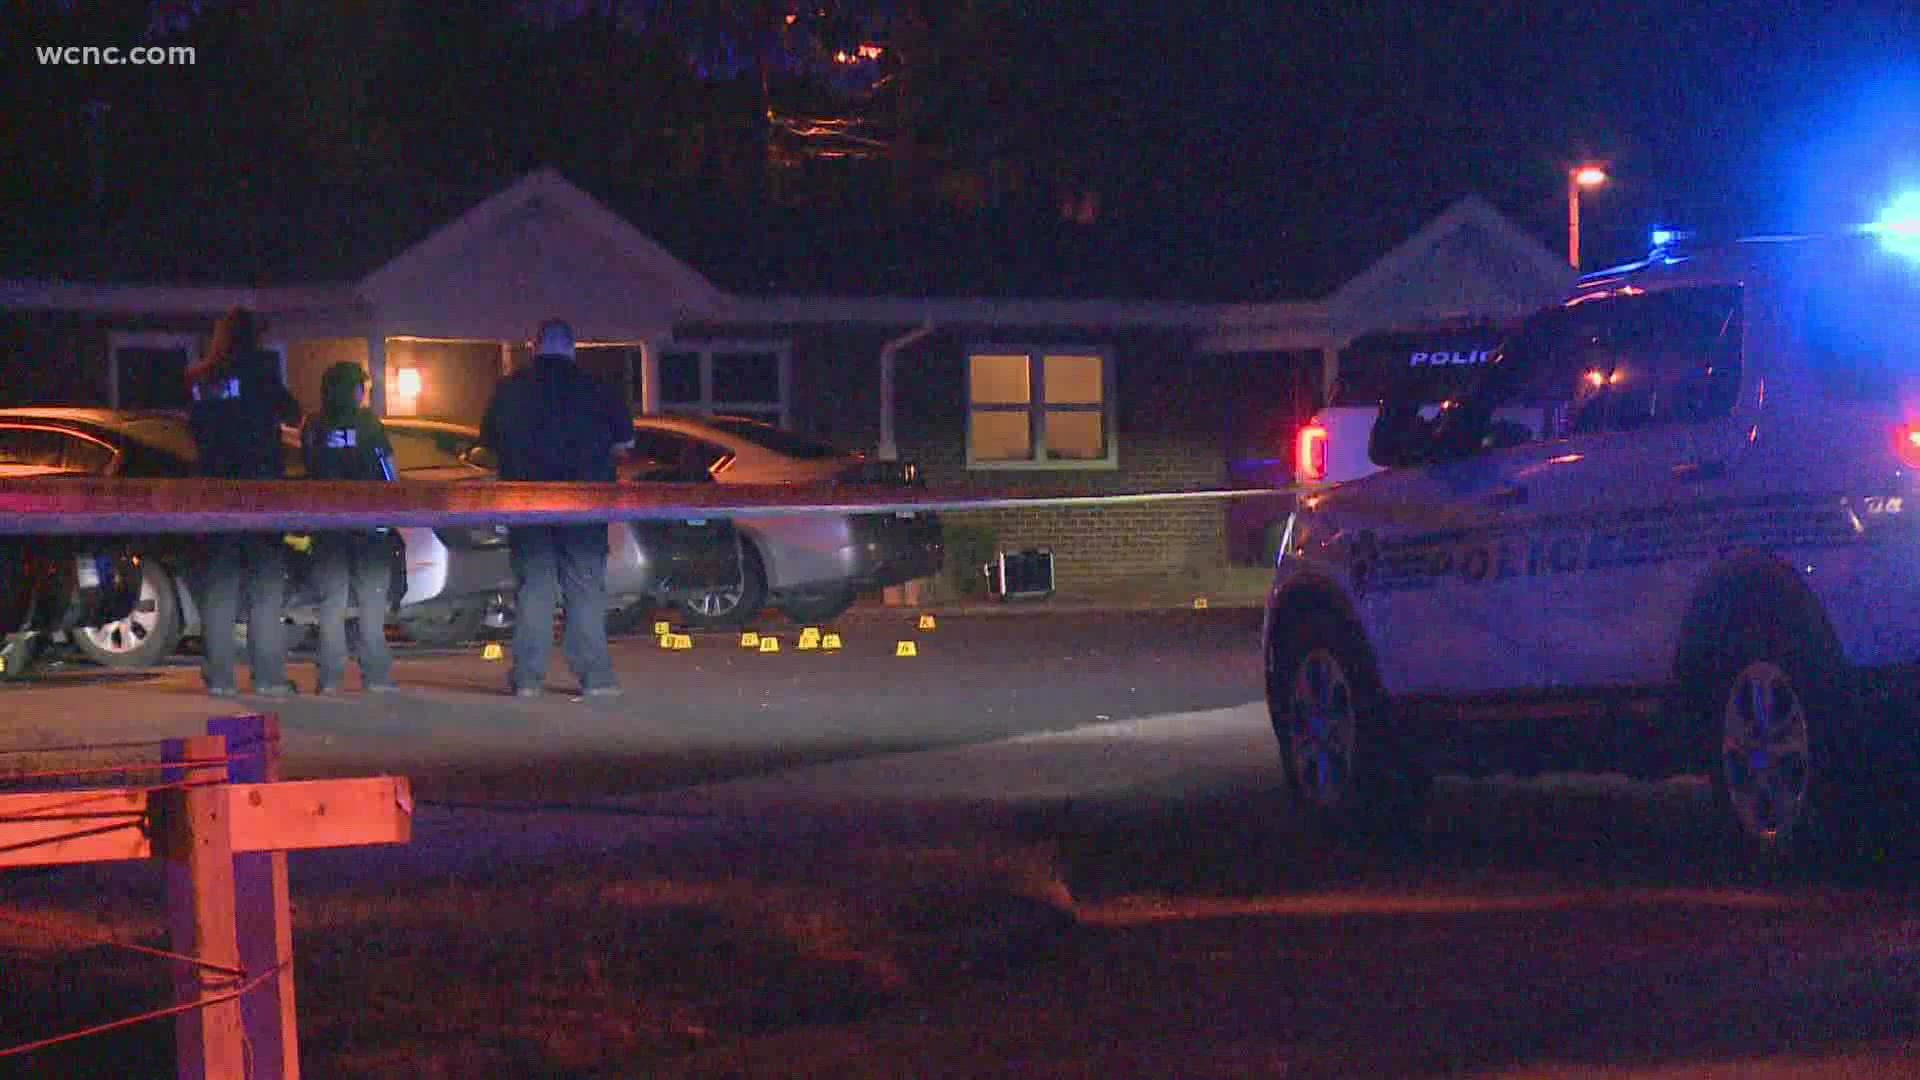 A teenager was rushed to the hospital after a shooting in west Charlotte late Tuesday night, detectives said.